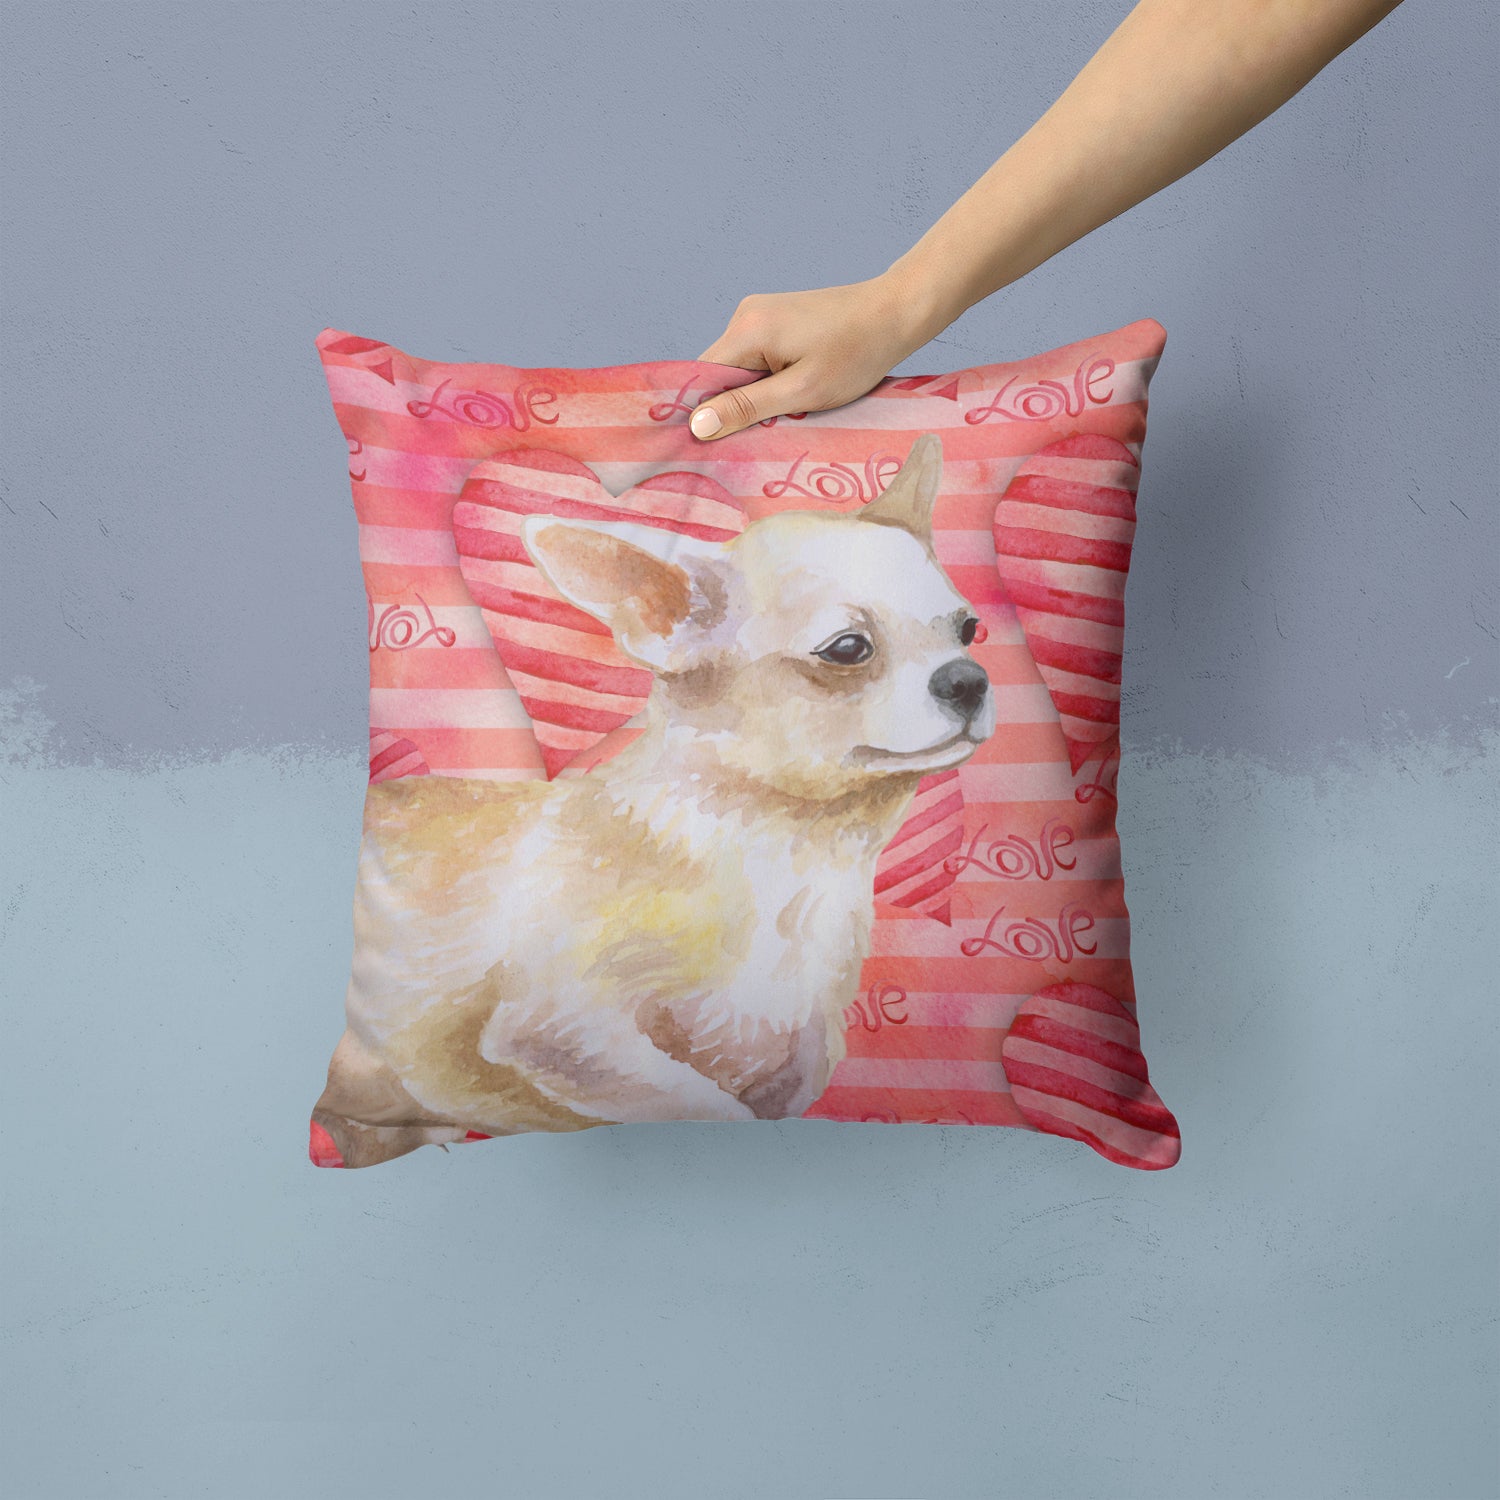 Chihuahua Leg up Love Fabric Decorative Pillow BB9784PW1414 - the-store.com